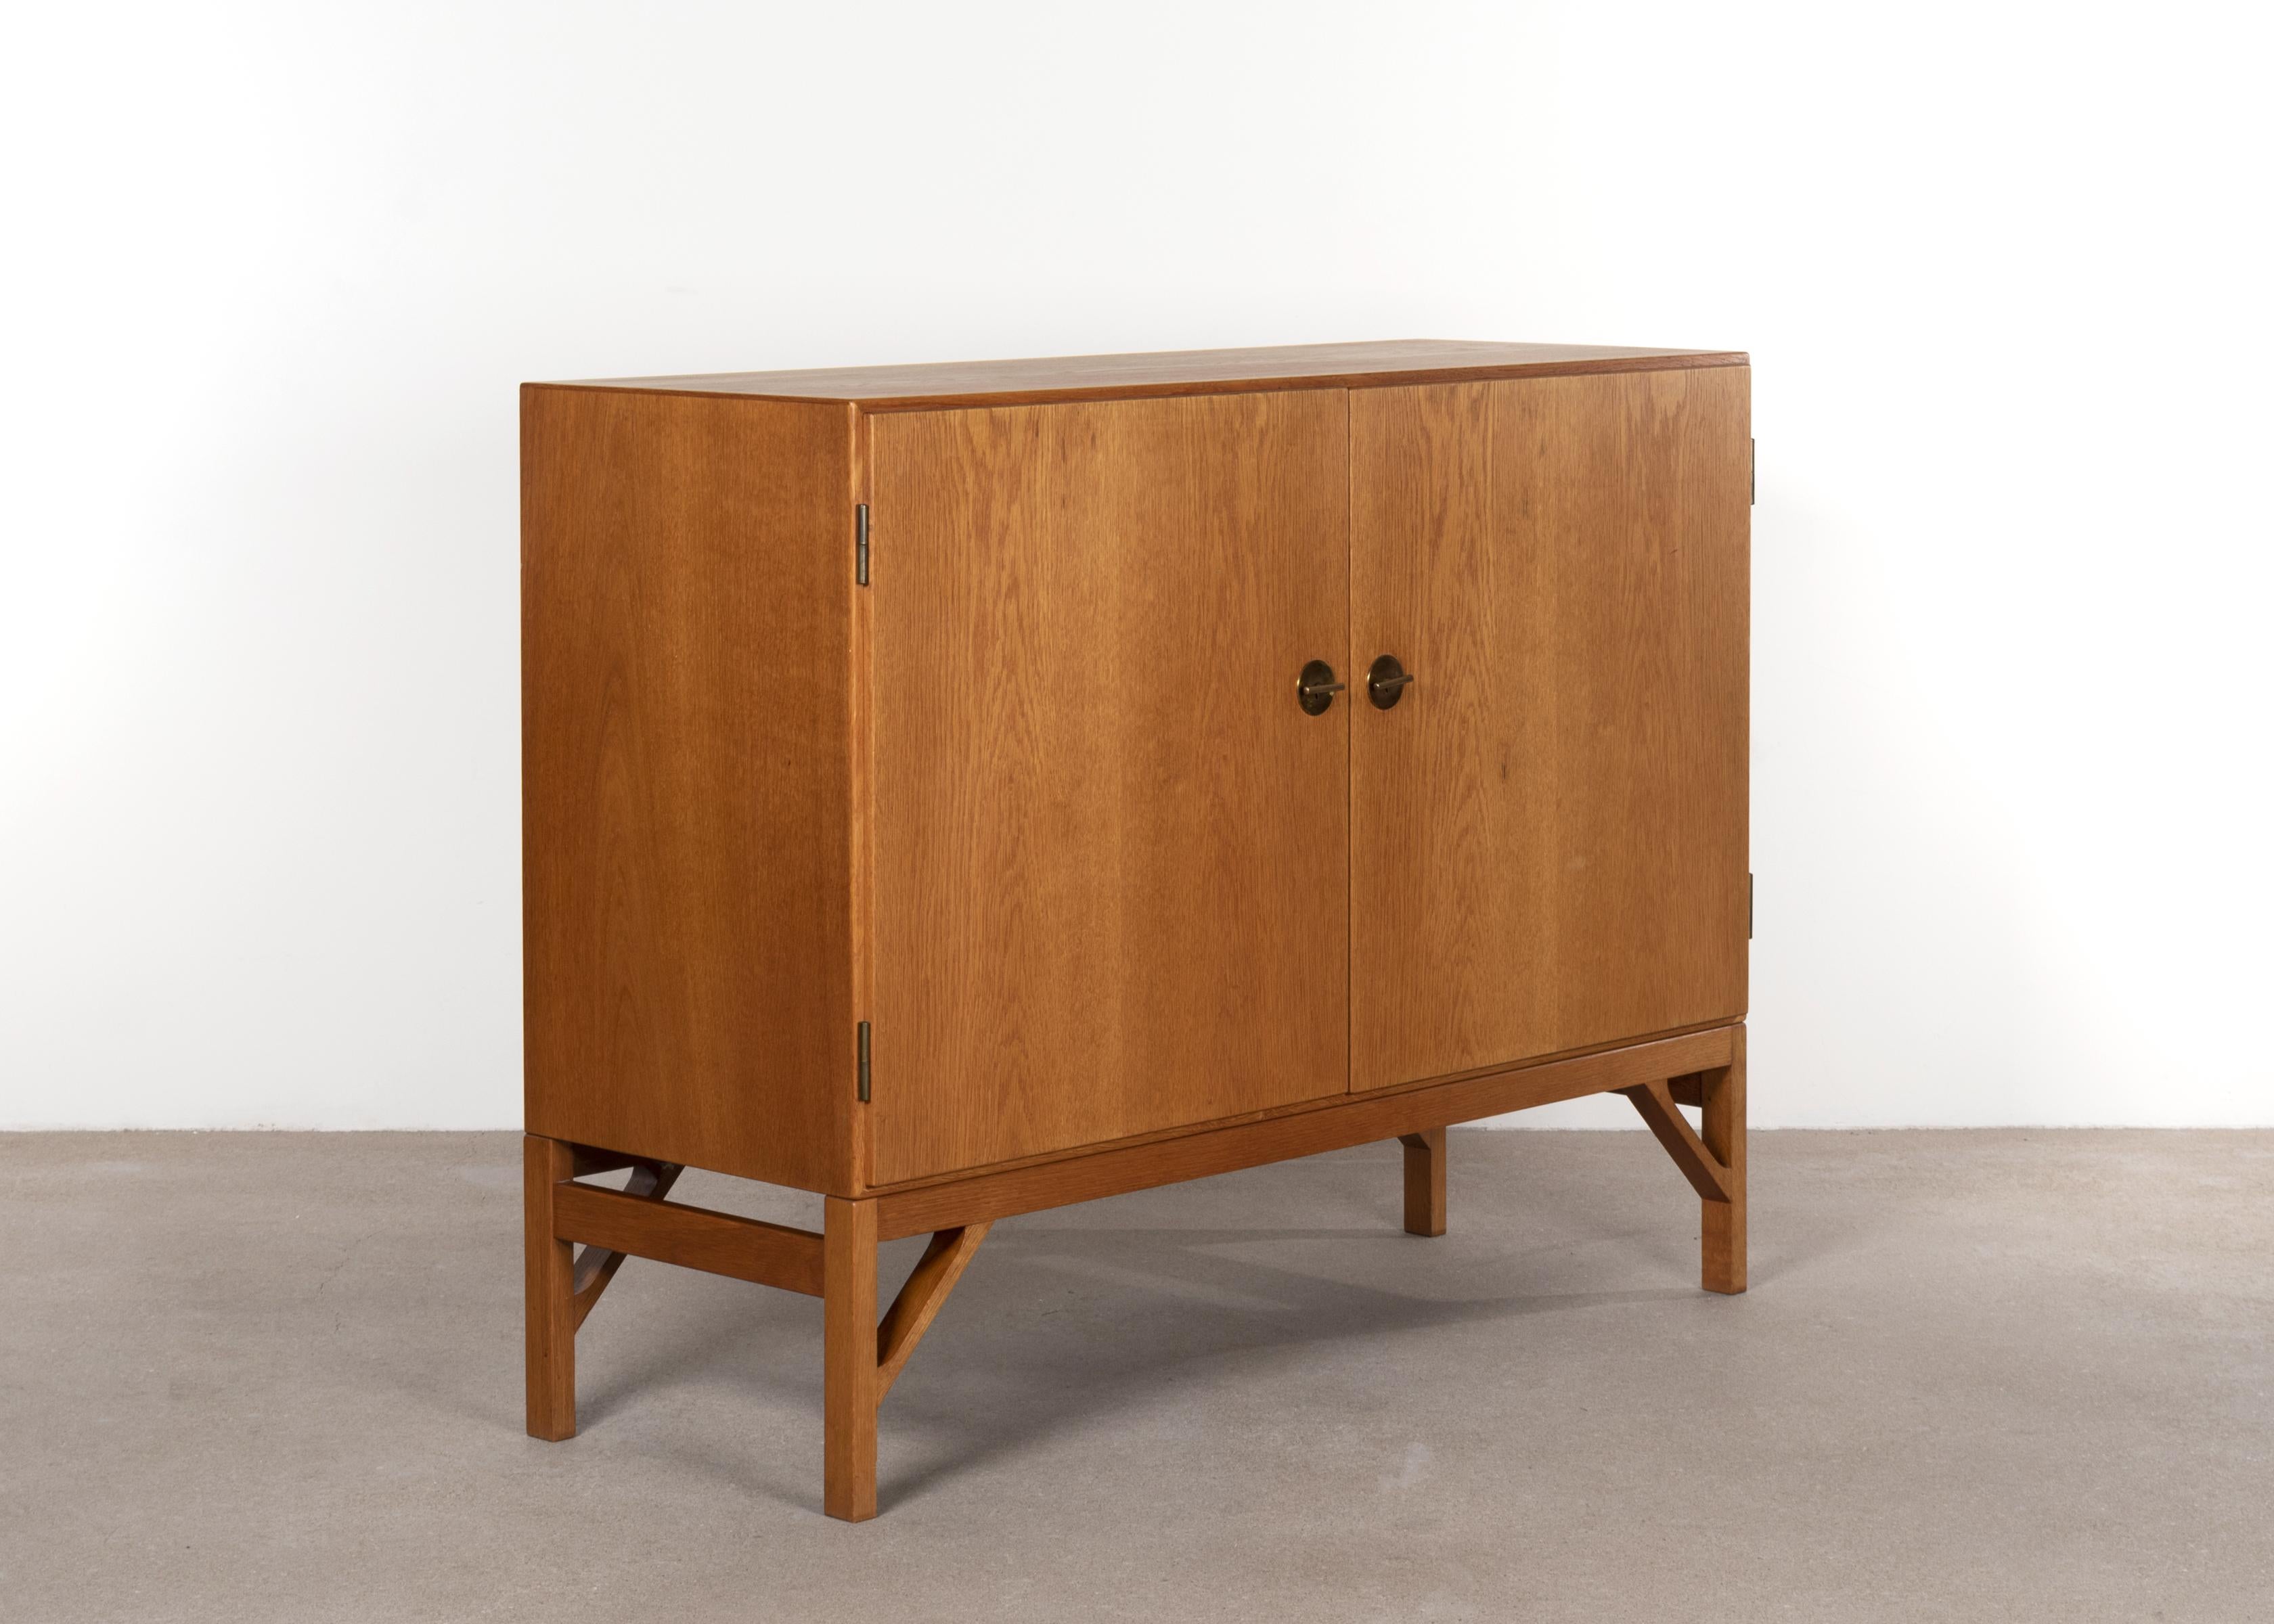 Elegant cabinet by Børge Mogensen model no. 232 designed in 1951. Oak veneer with shallow drawers and shelves in birch and brass details. All in very good condition with minor traces of use.